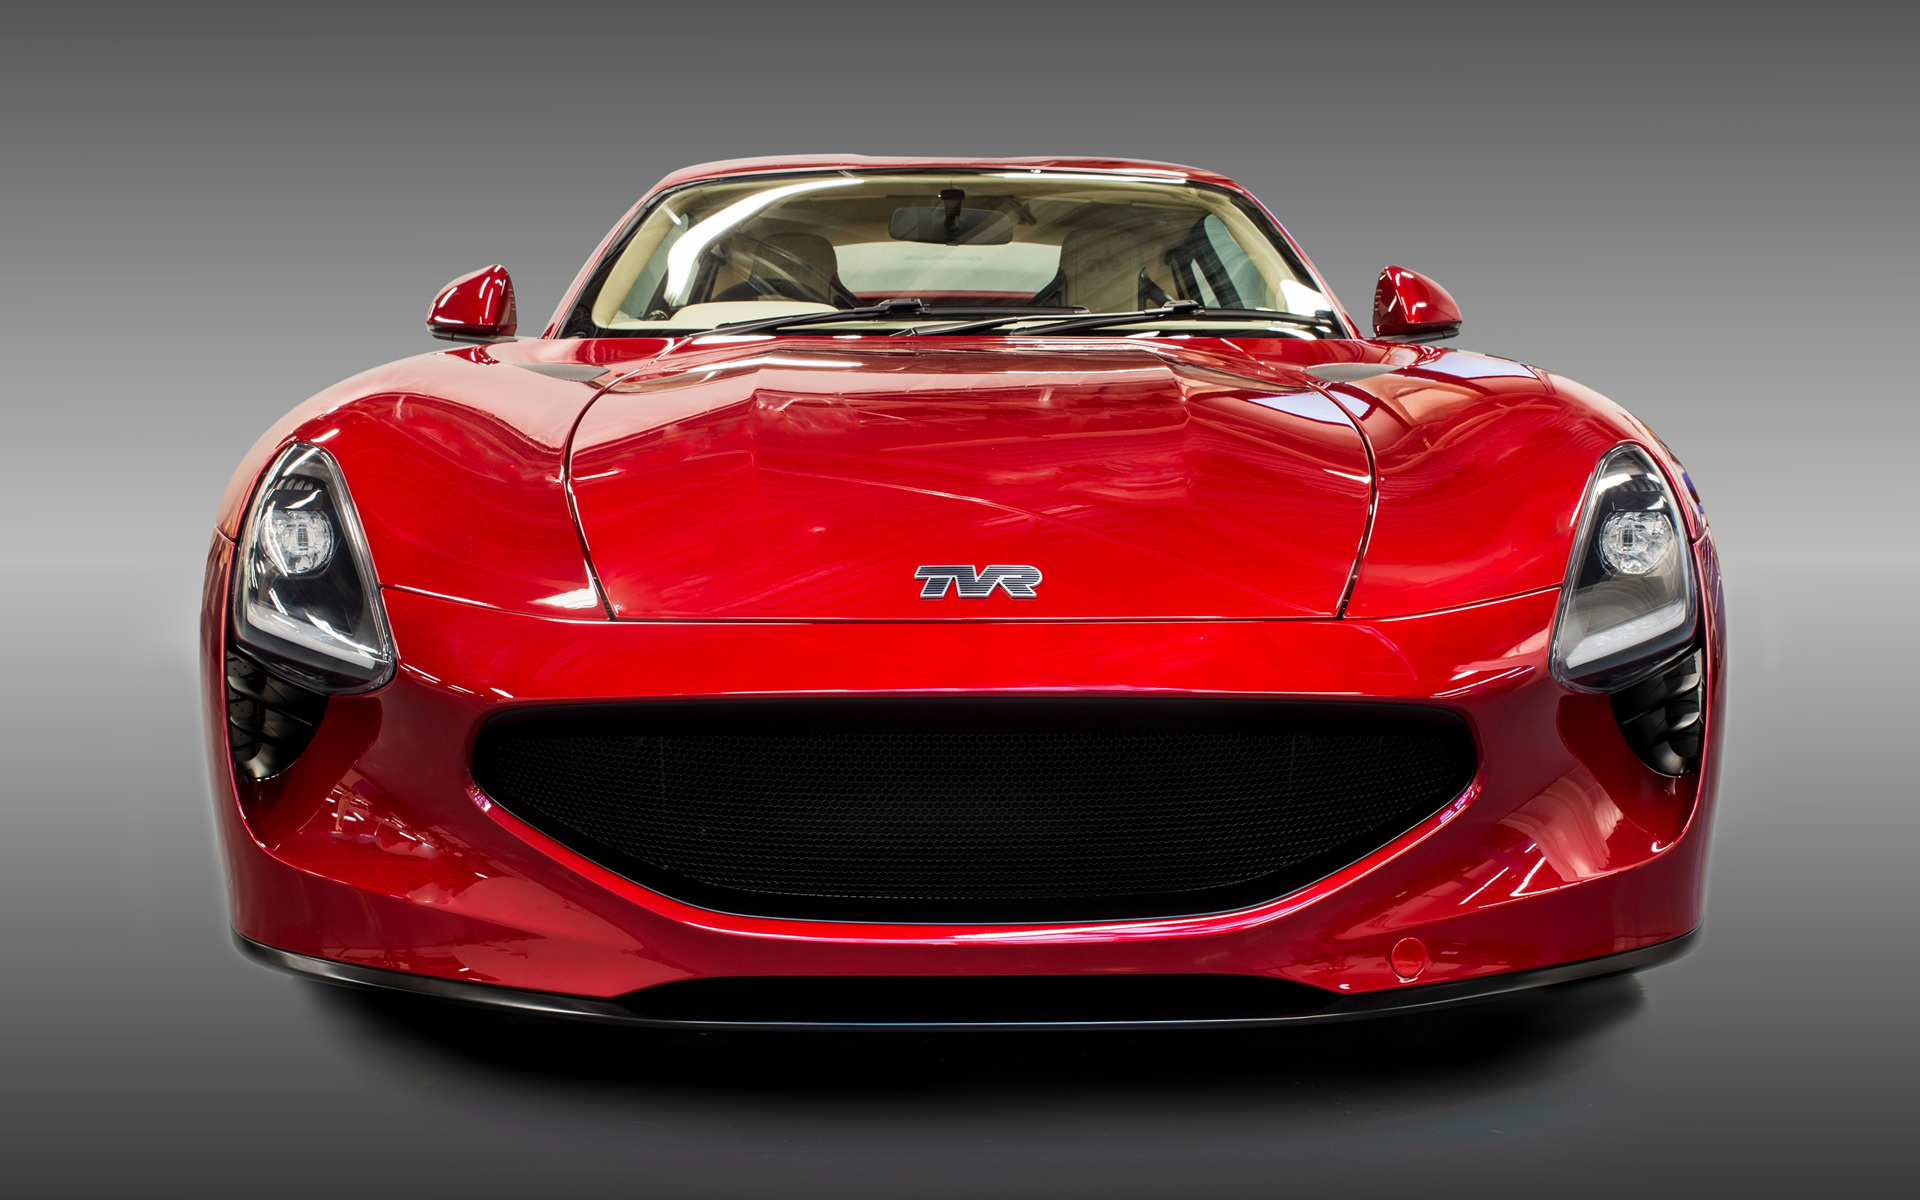 Tvr Griffith Wallpaper And HD Image Car Pixel